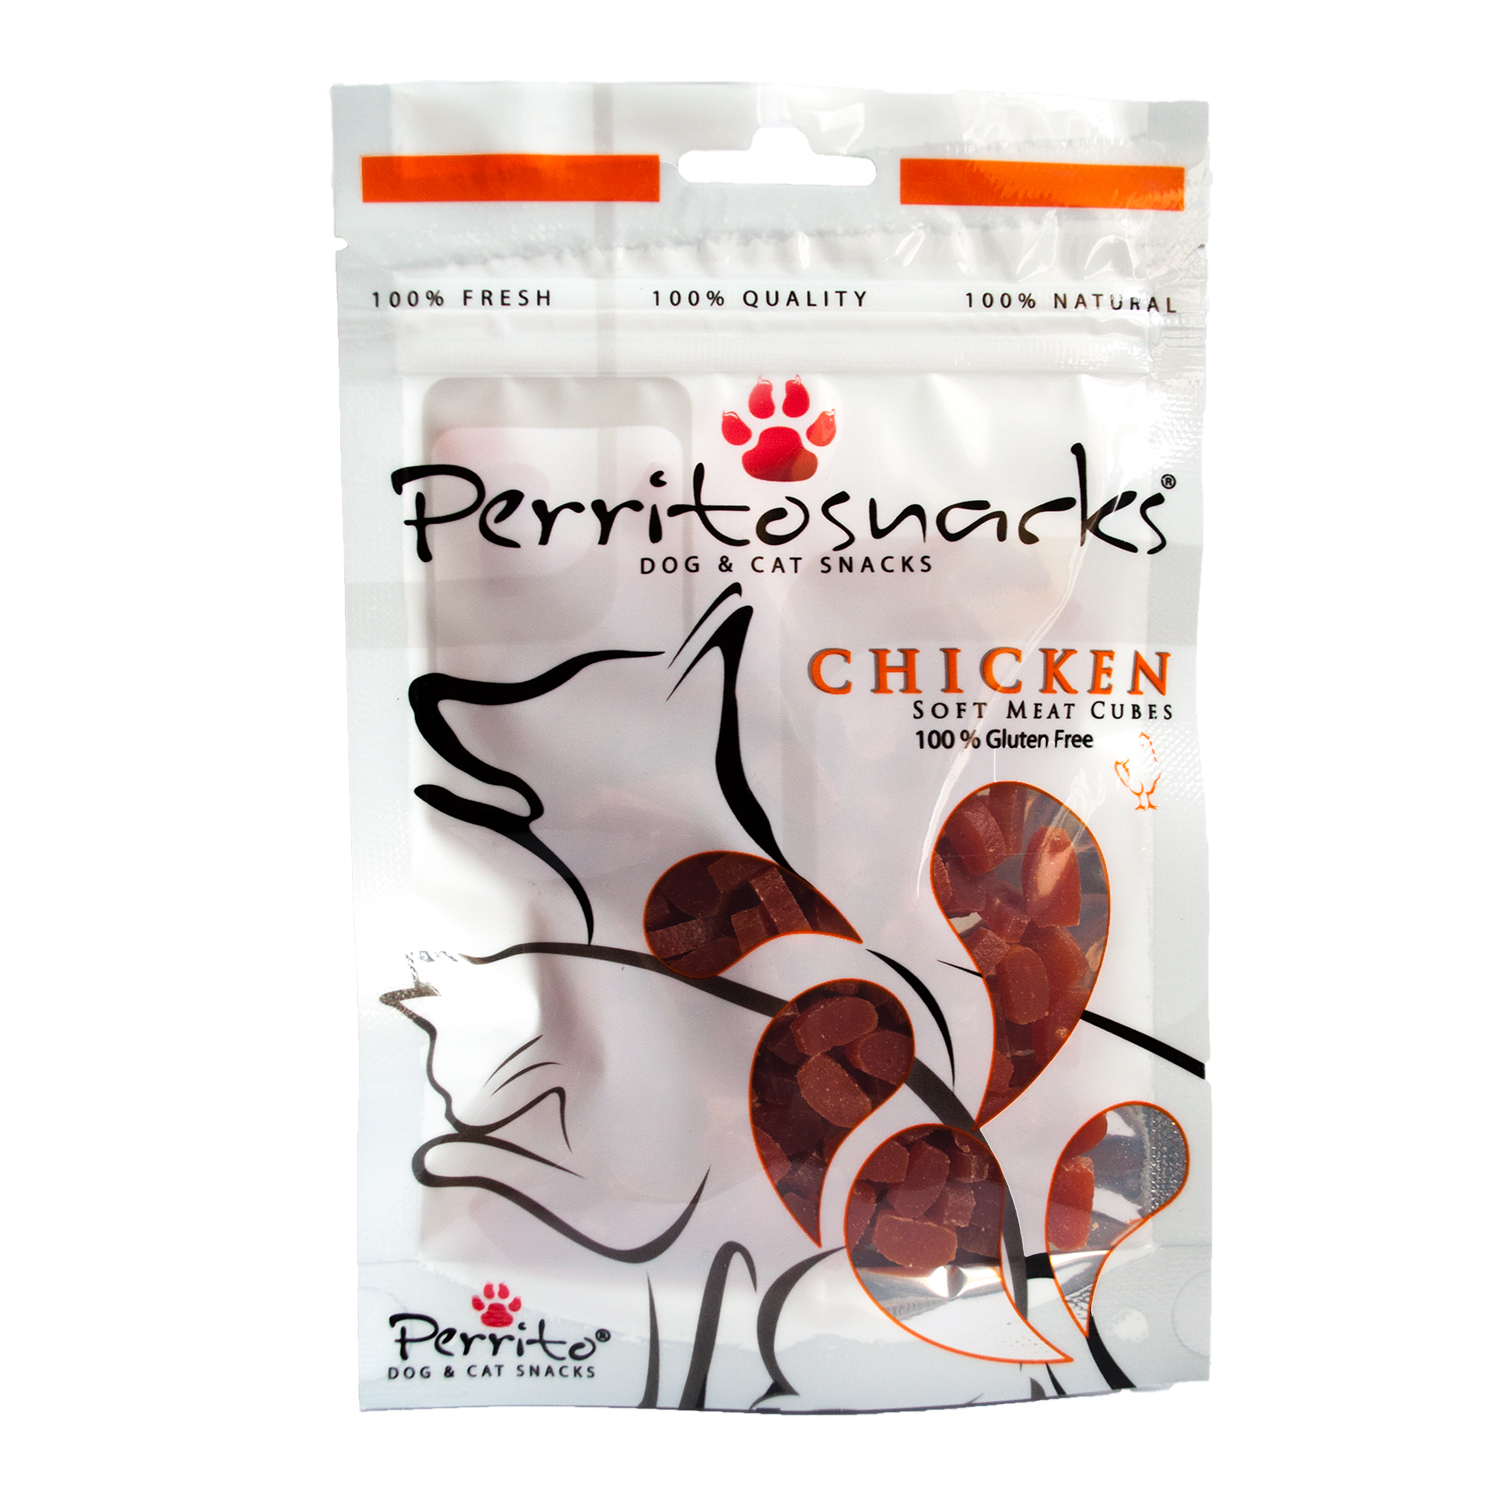 Perrito Chicken Soft Meat Cubes